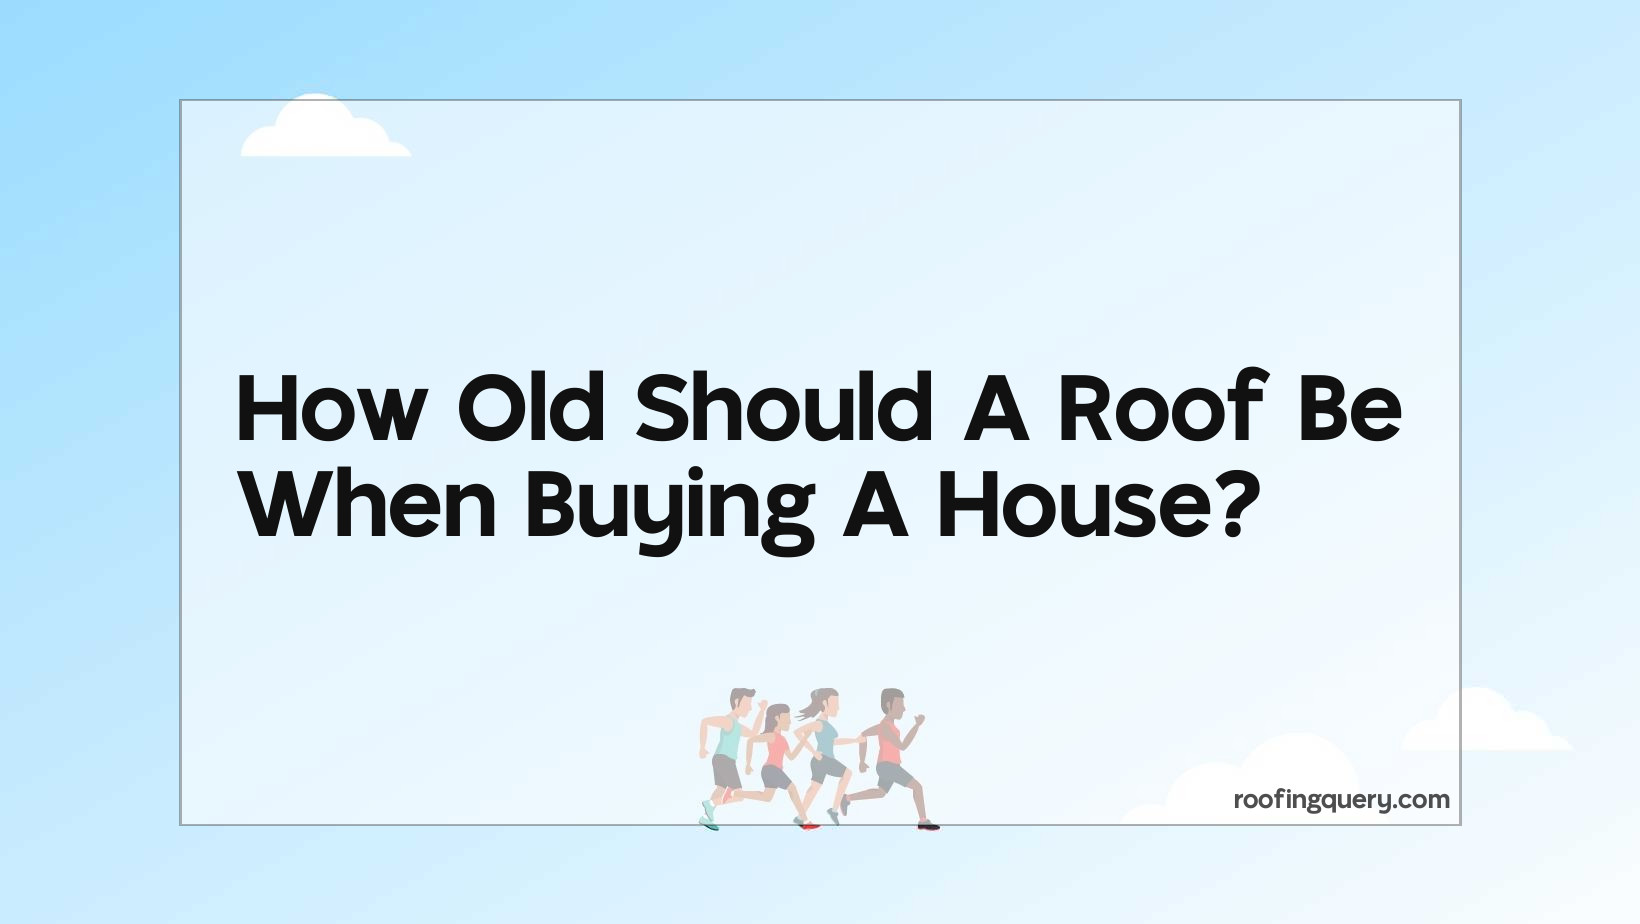 How Old Should A Roof Be When Buying A House?